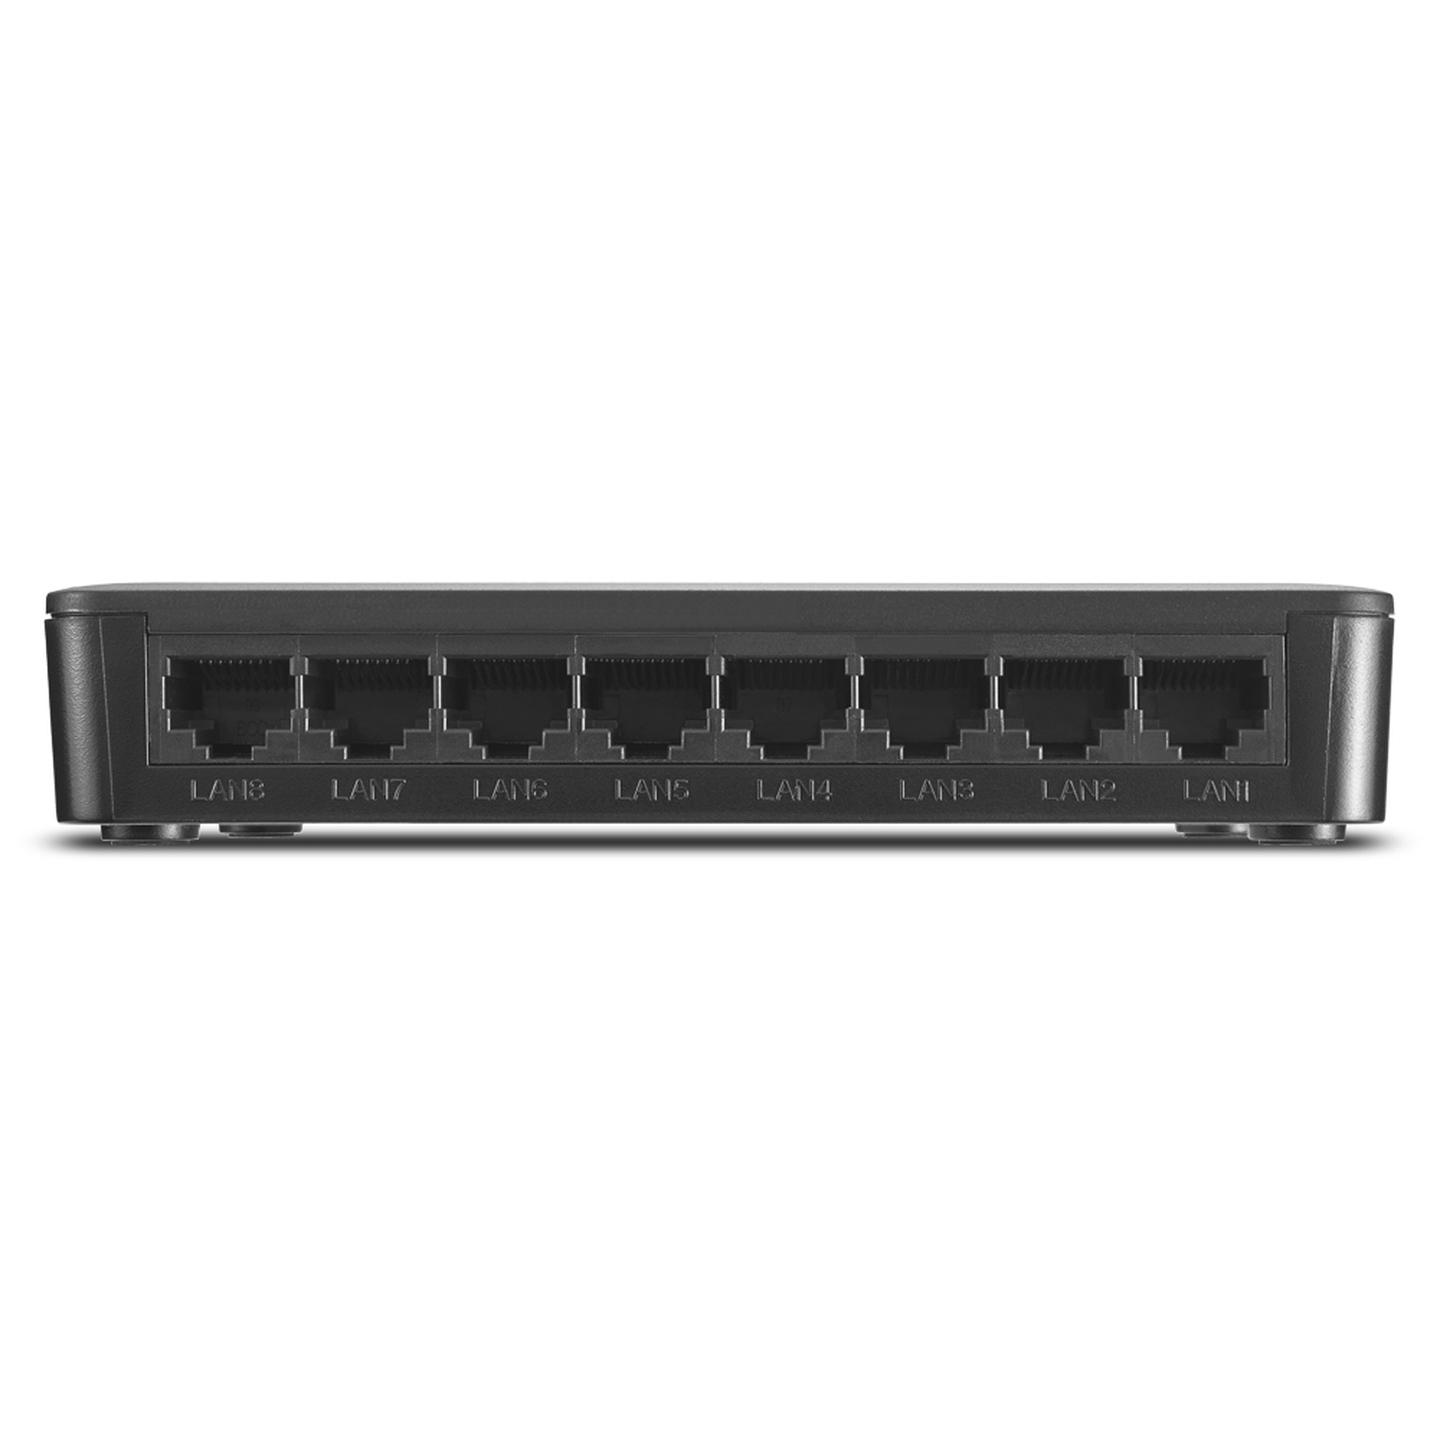 AIRPHO 8 Port 10/100Mbps Ethernet Switch